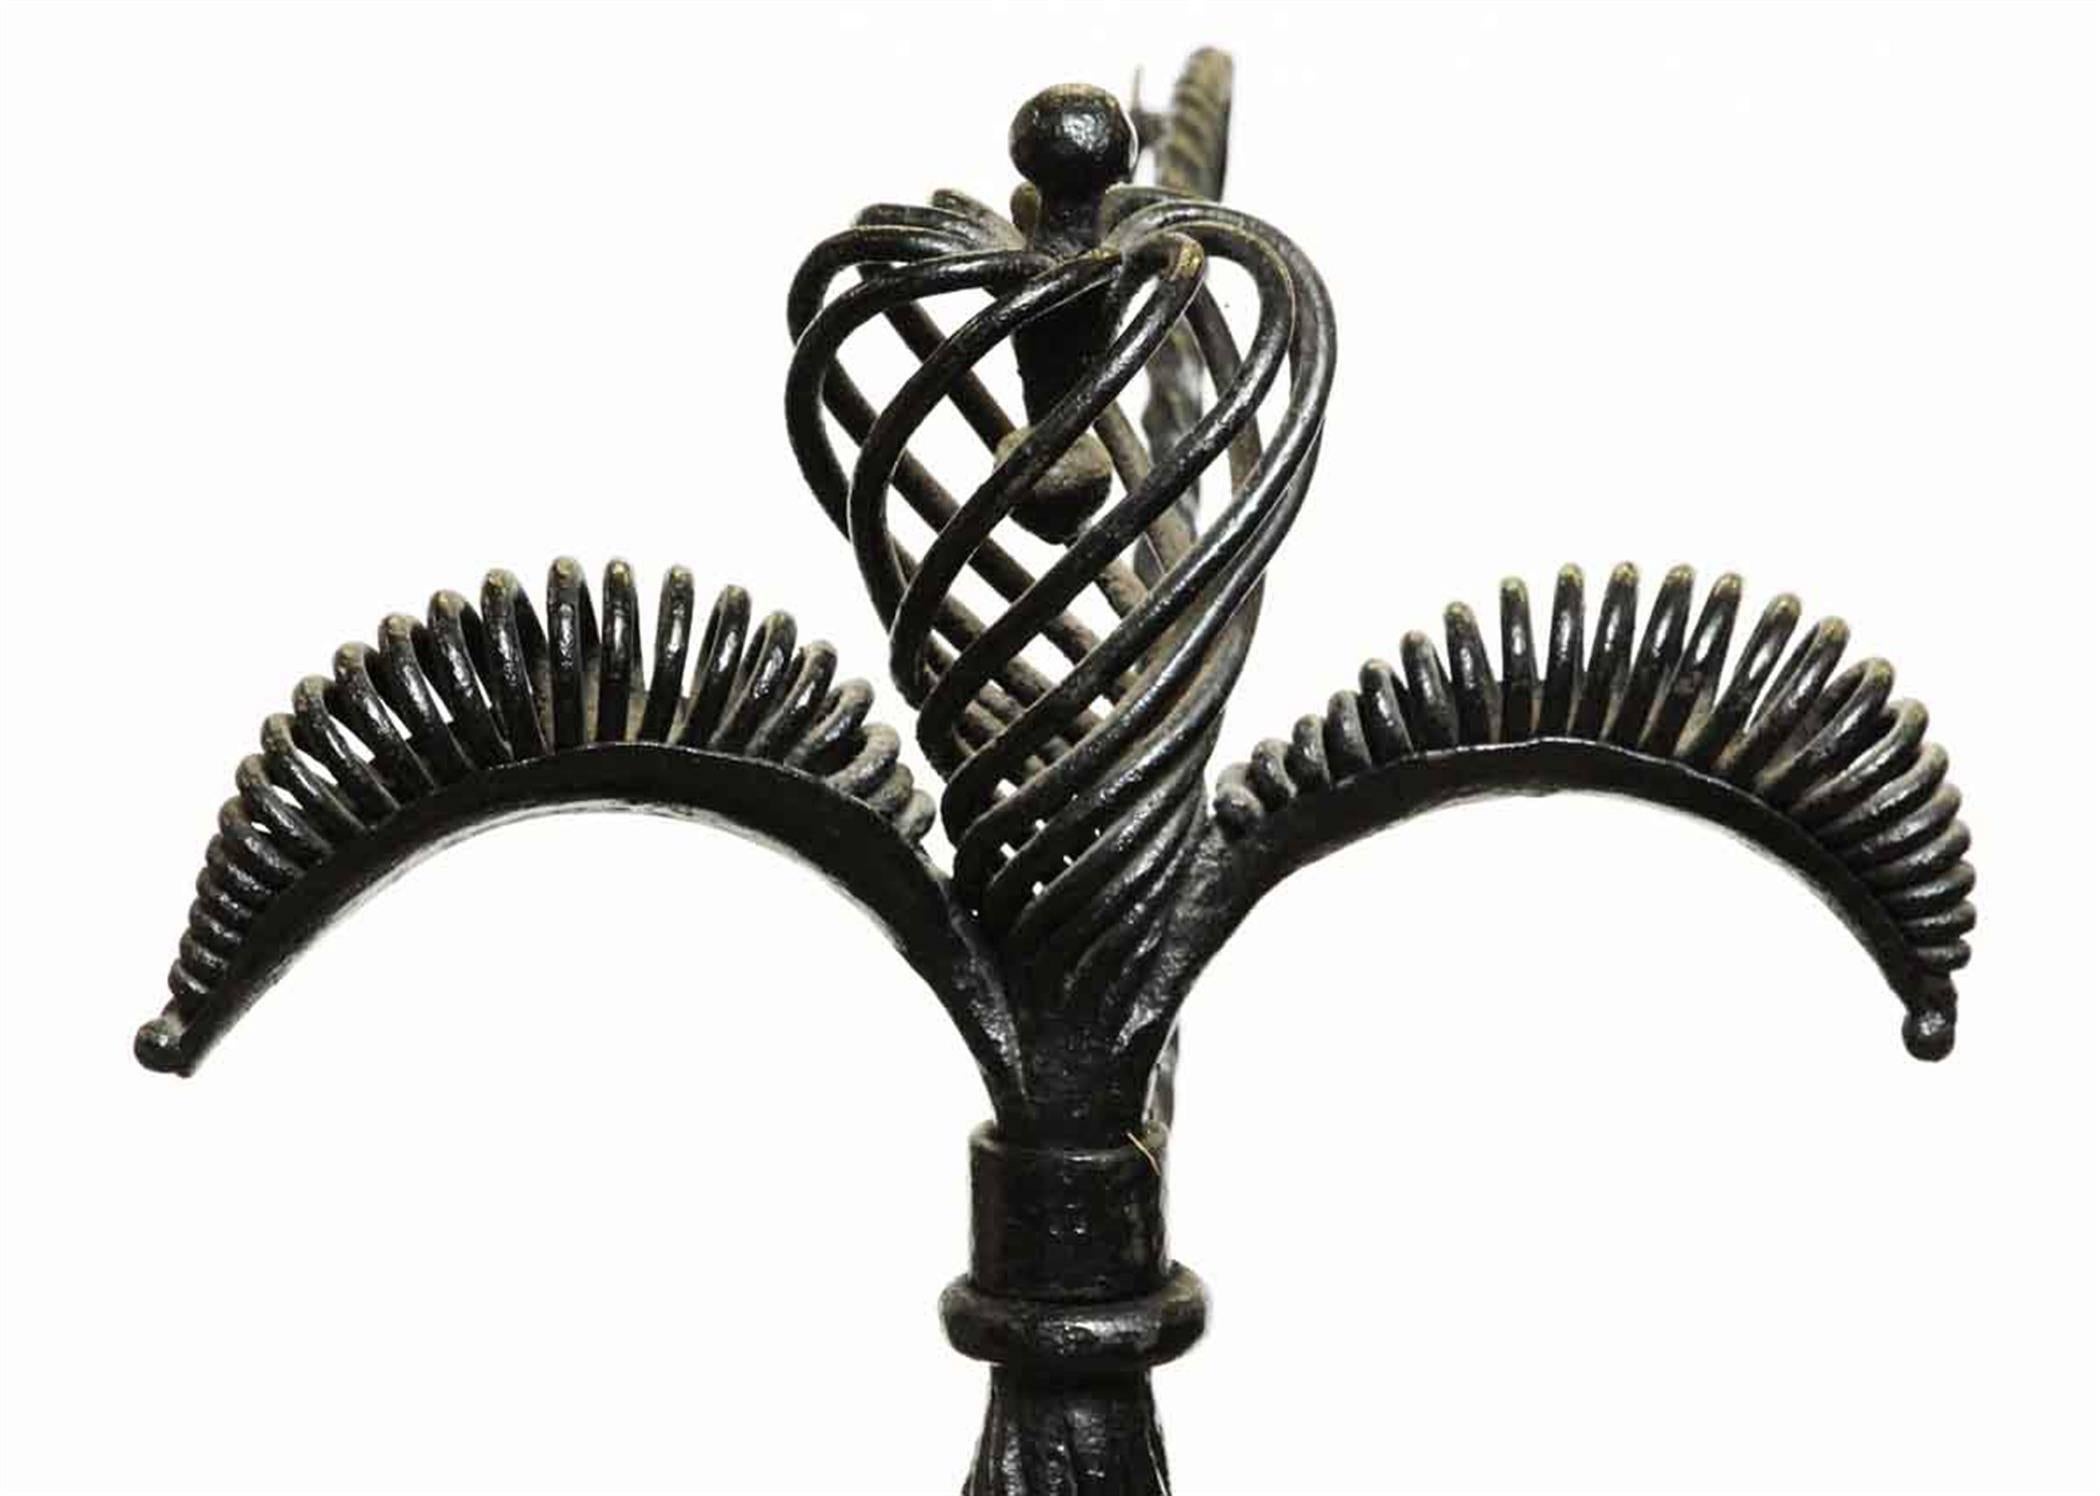 American 1880s Pair of Unique Large Blacksmith Hand-Wrought Iron Fireplace Andirons